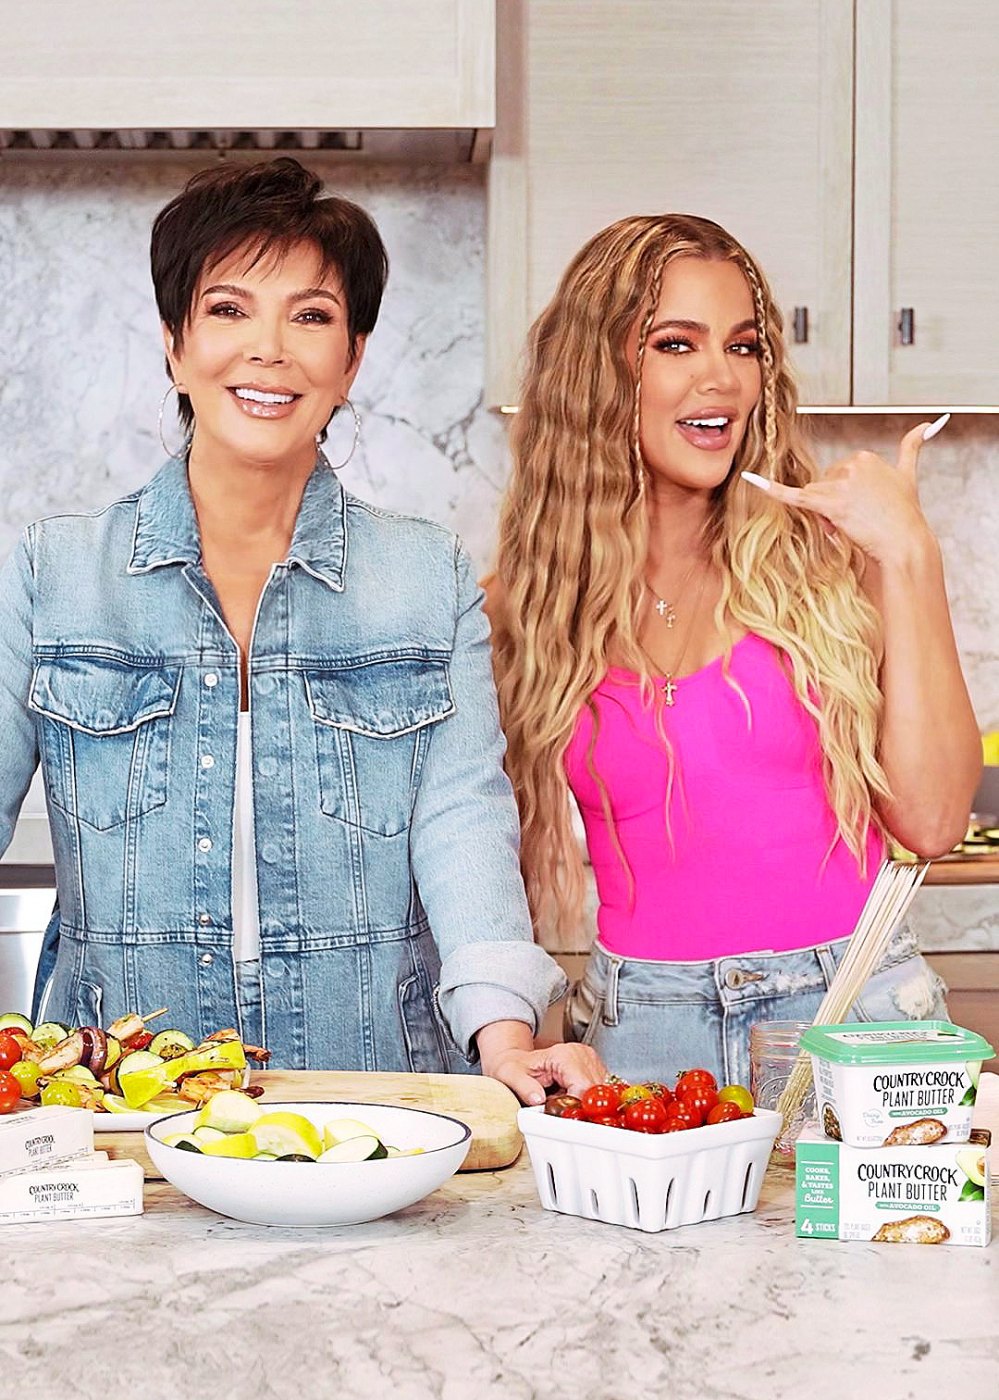 Khloe Kardashian and Kris Jenner's Roasted Vegetables Medley Is the Perfect Quick and Healthy Recipe